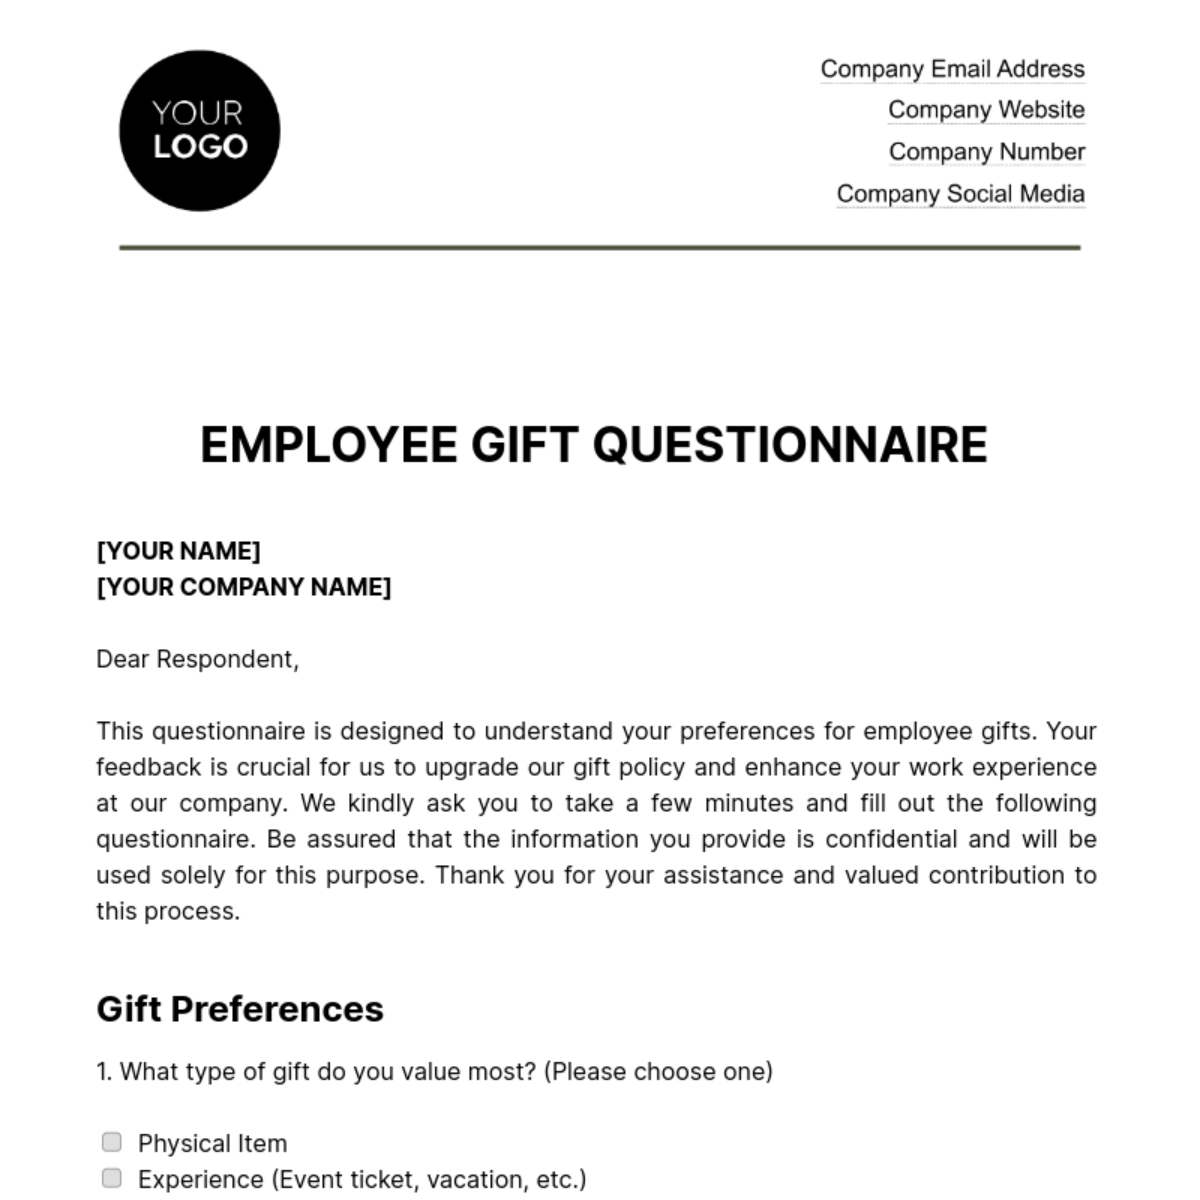 Free Employee Gift Questionnaire HR Template